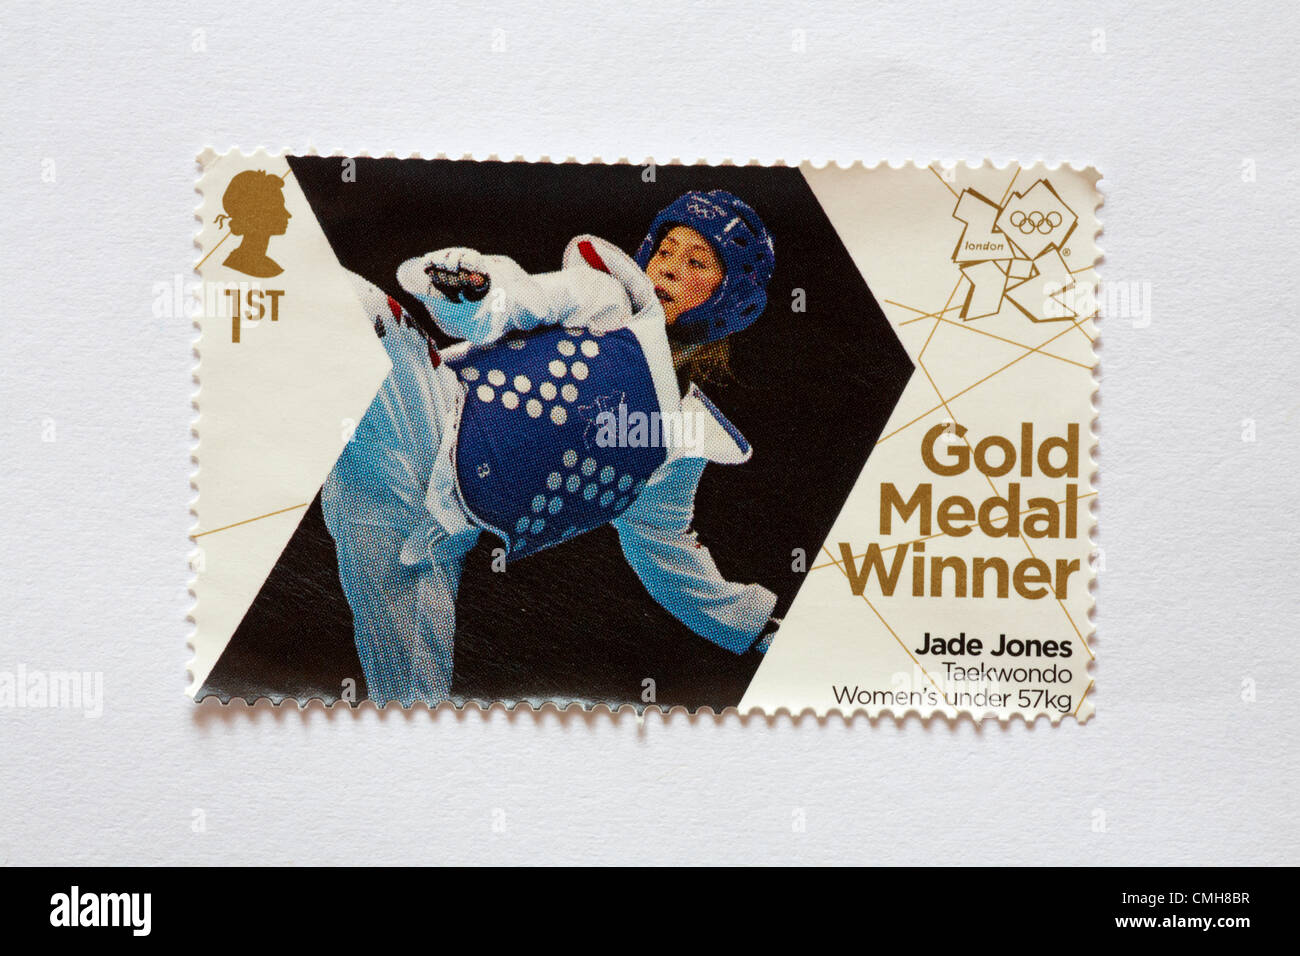 UK Friday 10 August 2012. Stamp to honour gold medal winner Jade Jones in the Taekwondo Women's under 57kg event. Stamp purchased and stuck on white to send to Olympic supporter.  Credit:  Carolyn Jenkins / Alamy Live News Stock Photo